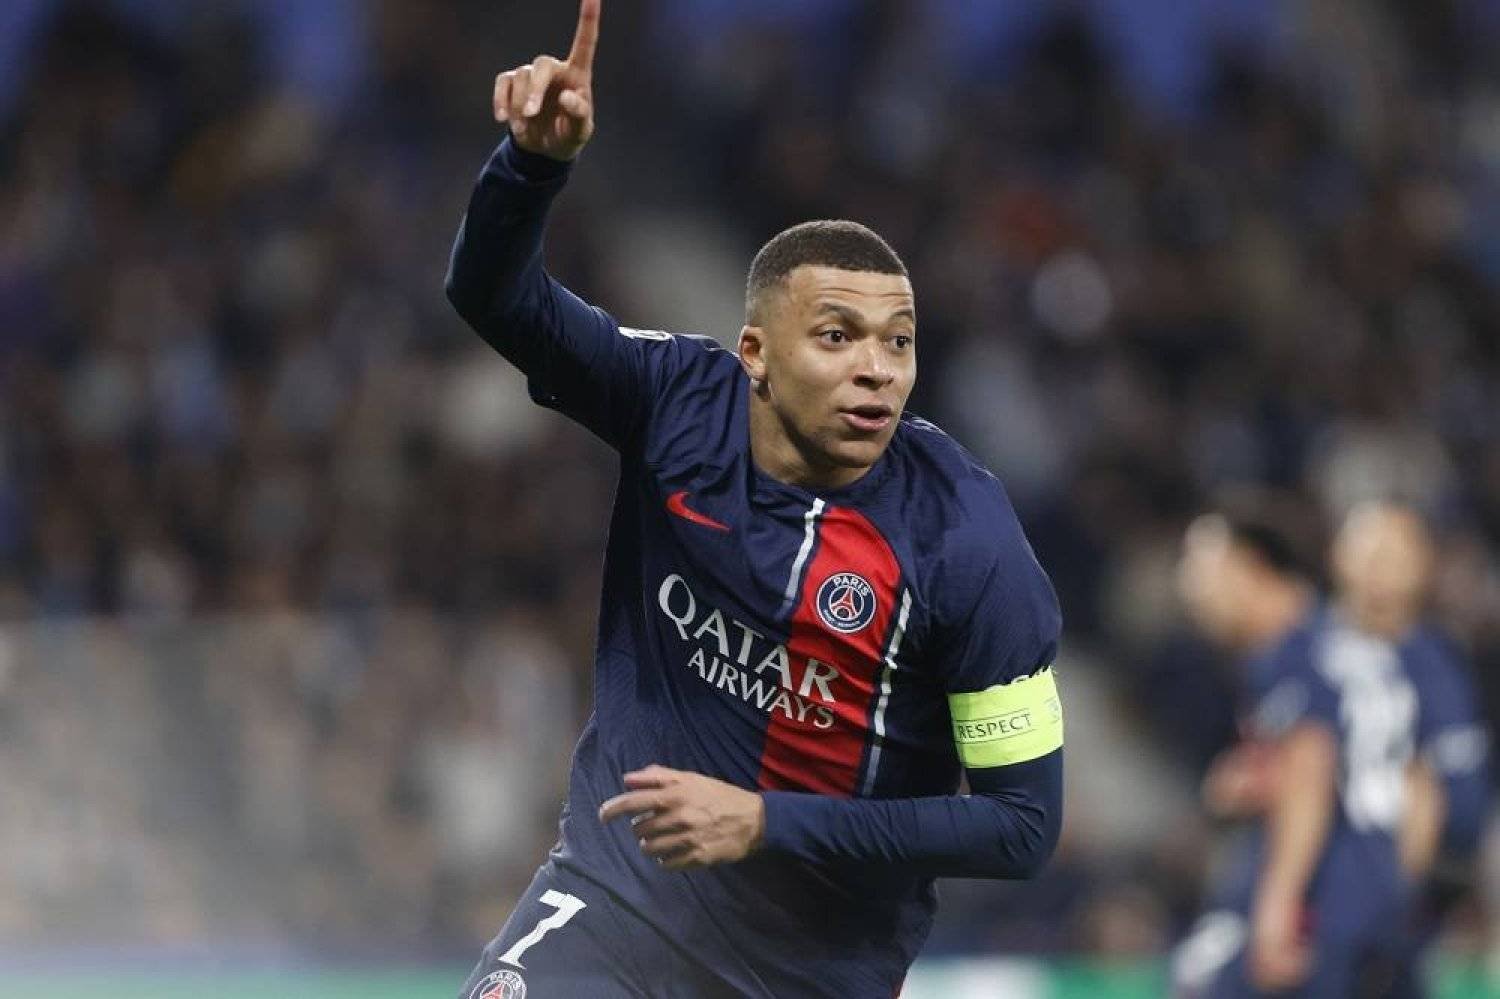 Kylian Mbappé of PSG celebrates after scoring the 0-2 goal during the UEFA Champions League Round of 16, 2nd leg soccer match between Real Sociedad and Paris Saint-Germain, in San Sebastian, Spain, 05 March 2024. (EPA)
